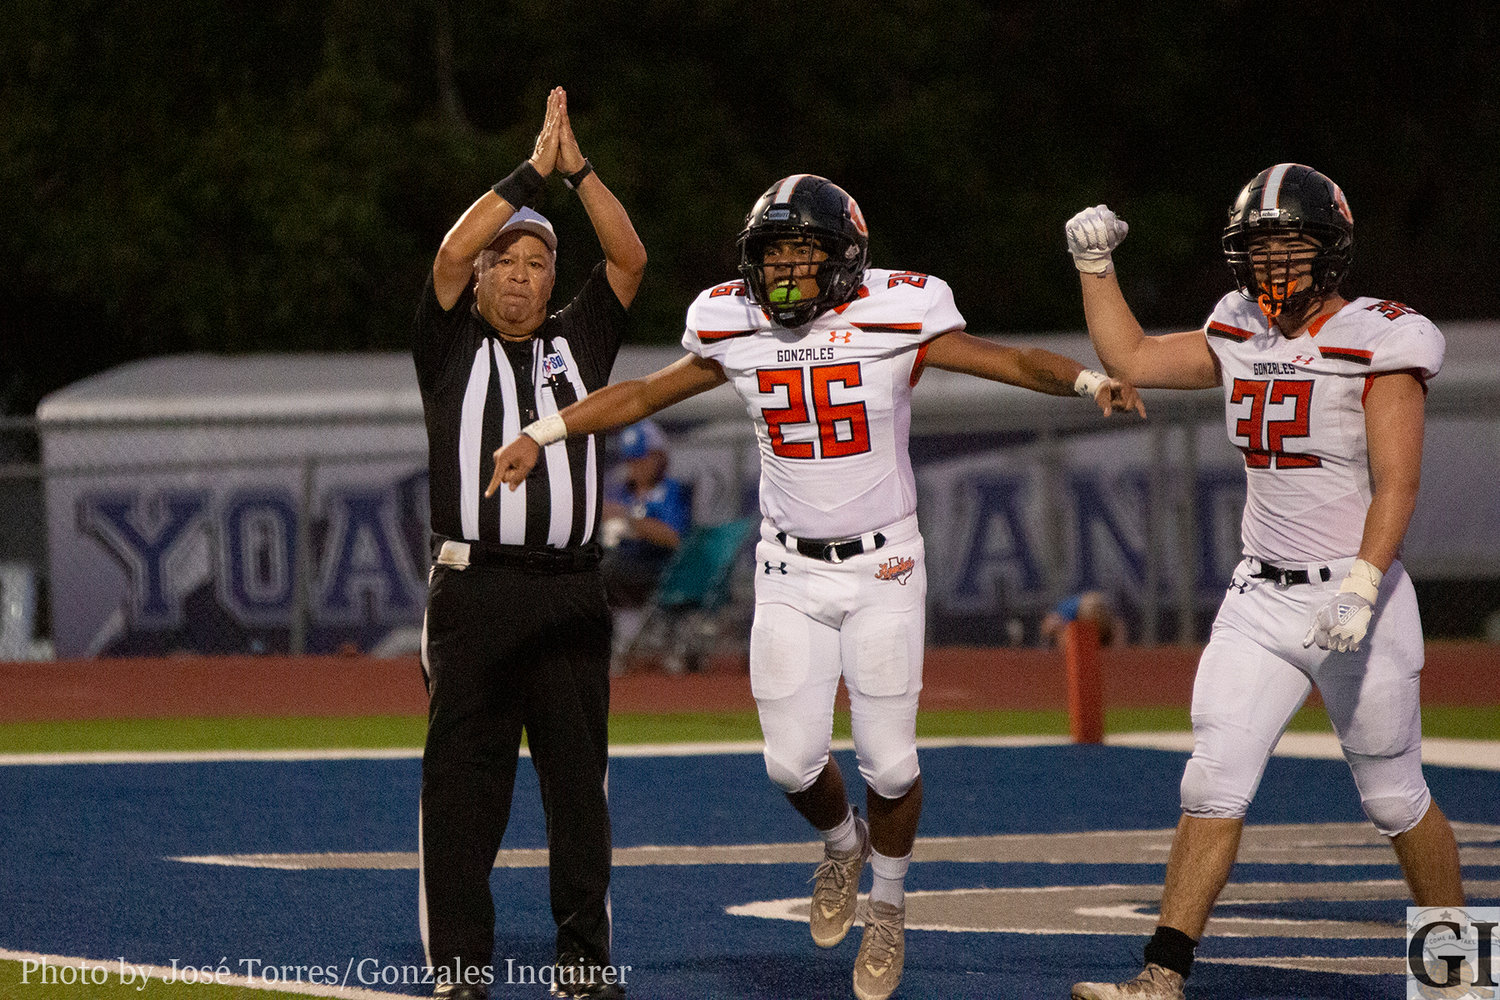 Aaron Guerrero and Diego Diaz de Leon celebrate a safety in the first half of Gonzales' 27-25 win over Yoakum.